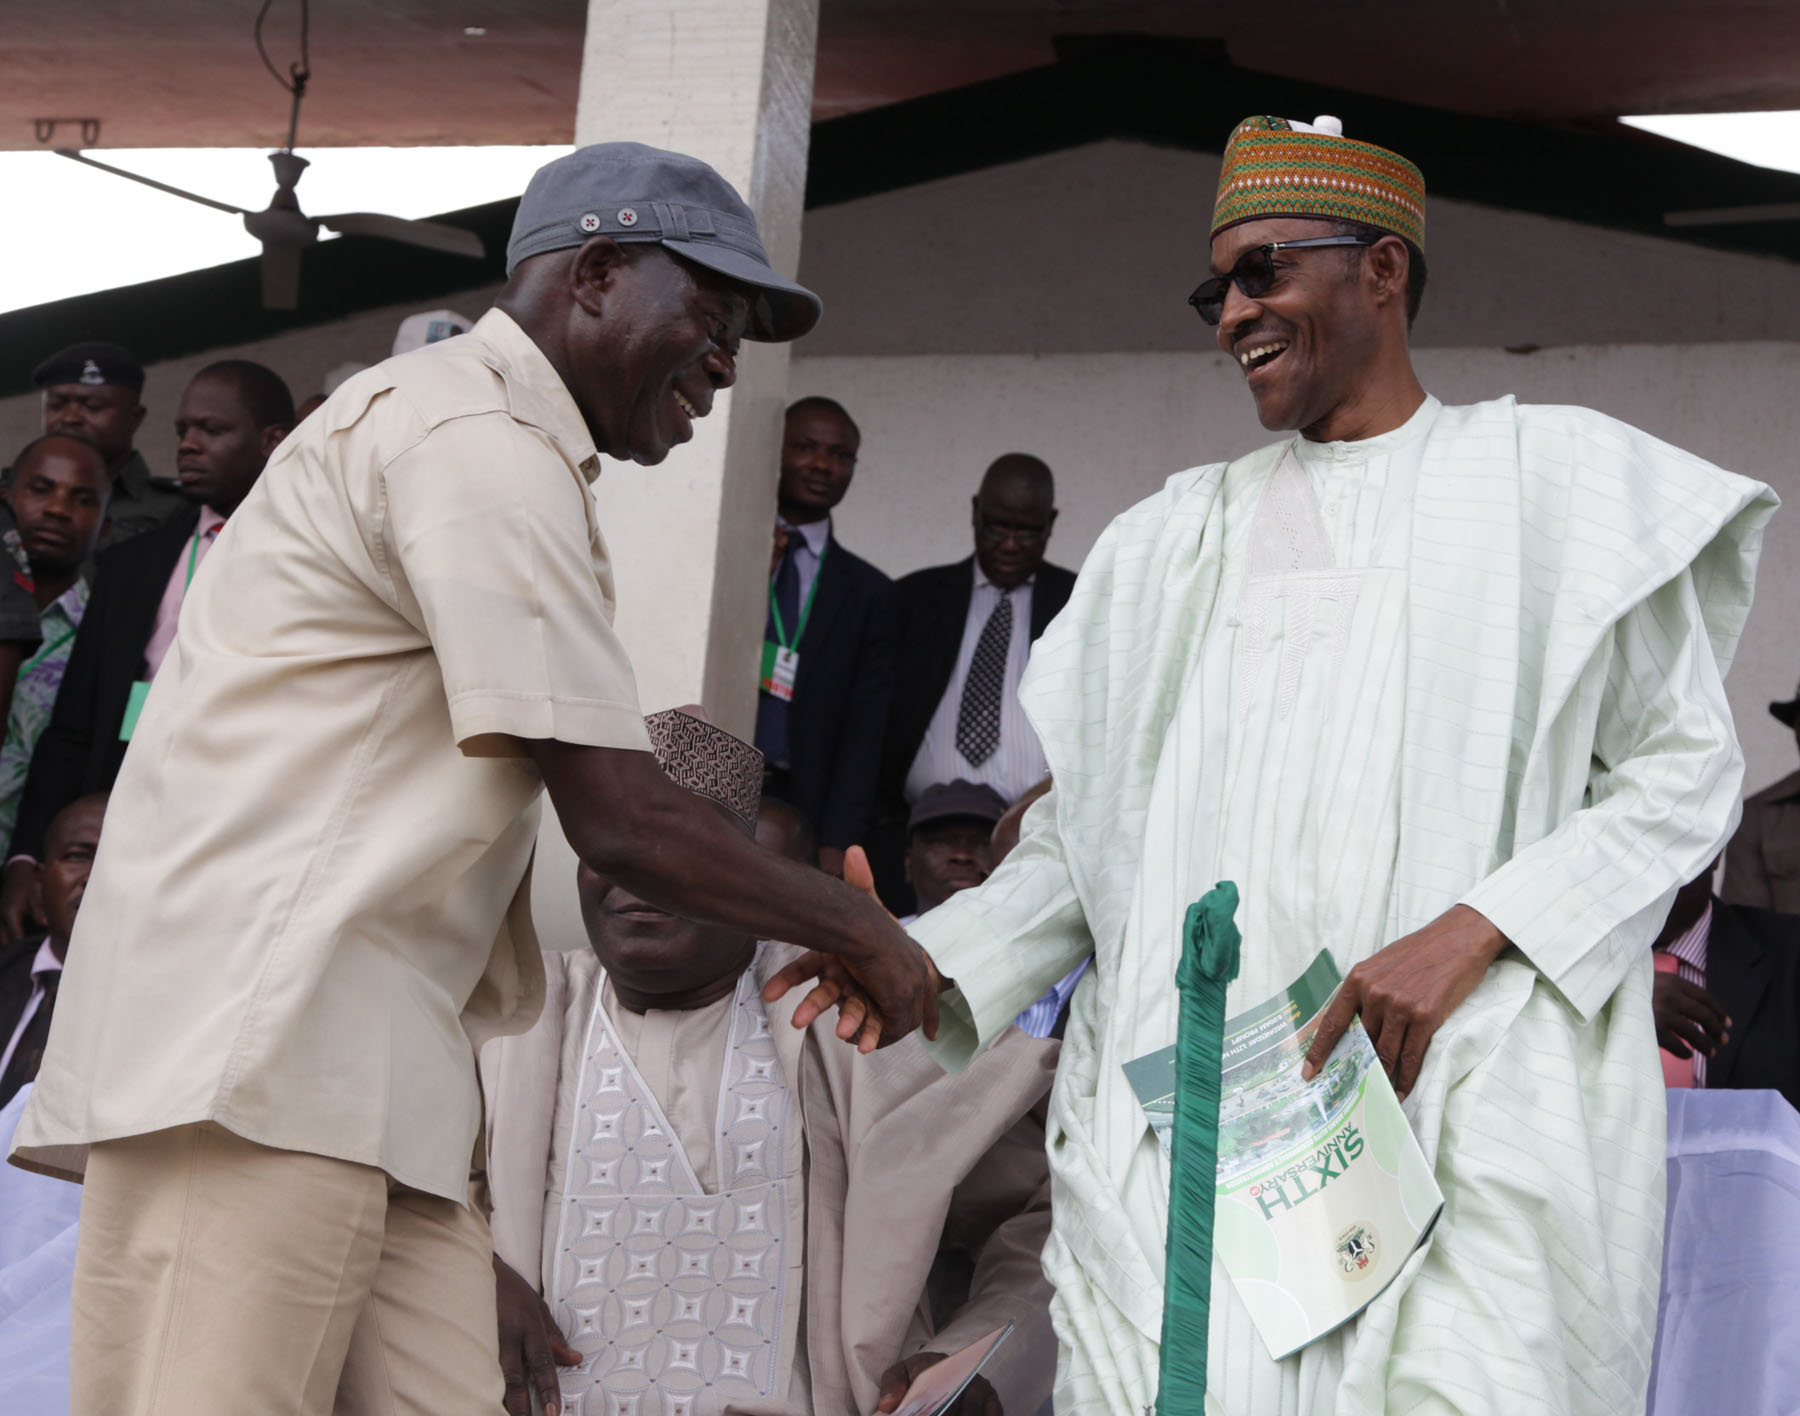 Governor Adams Oshiomhole of Edo State and Maj.-Gen Mohammadu Buhari (rtd), former Head of State, at the celebration of the 6th Anniversary of the administration of Governor Adams Oshiomhole in Benin City, Edo State, Wednesday